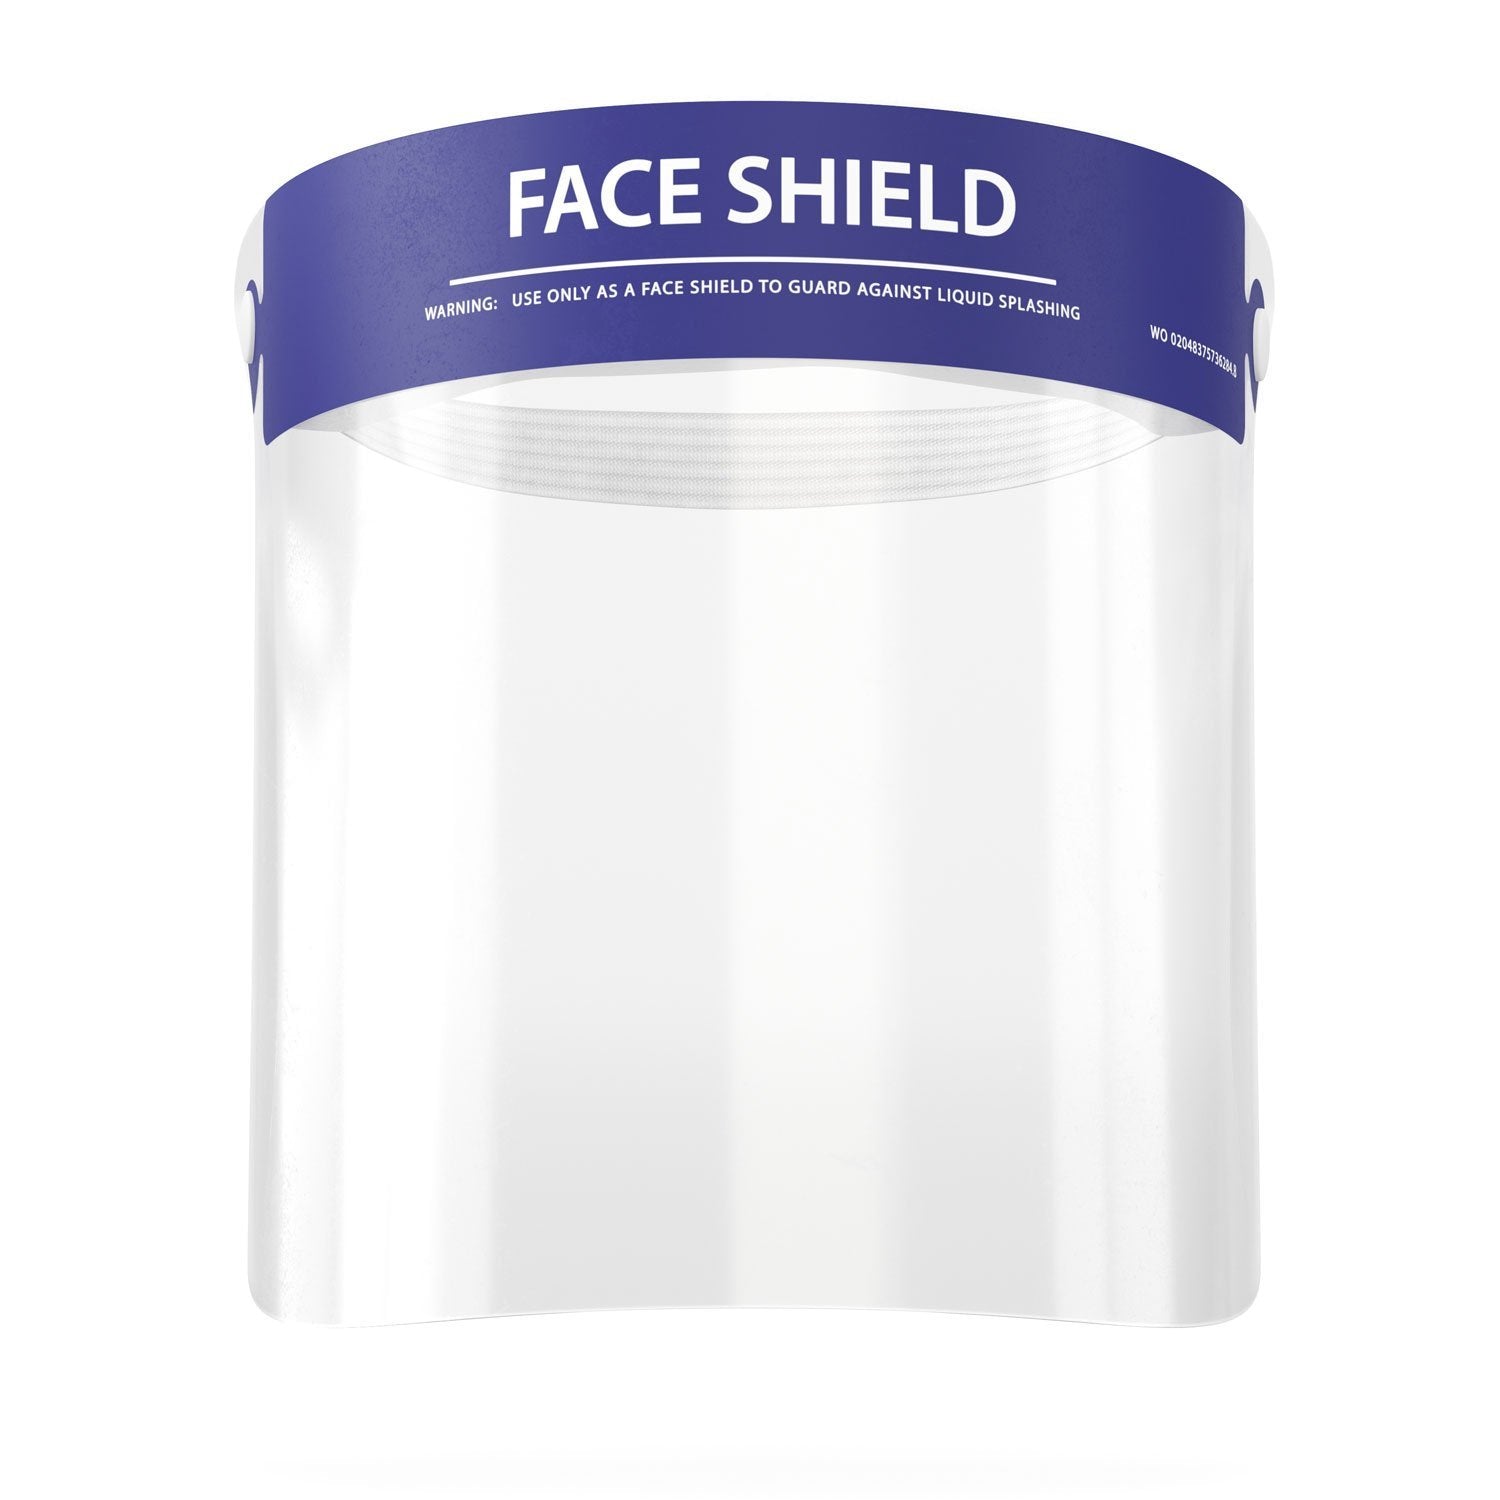 Face Shield - Beauty Hair Products Ltd